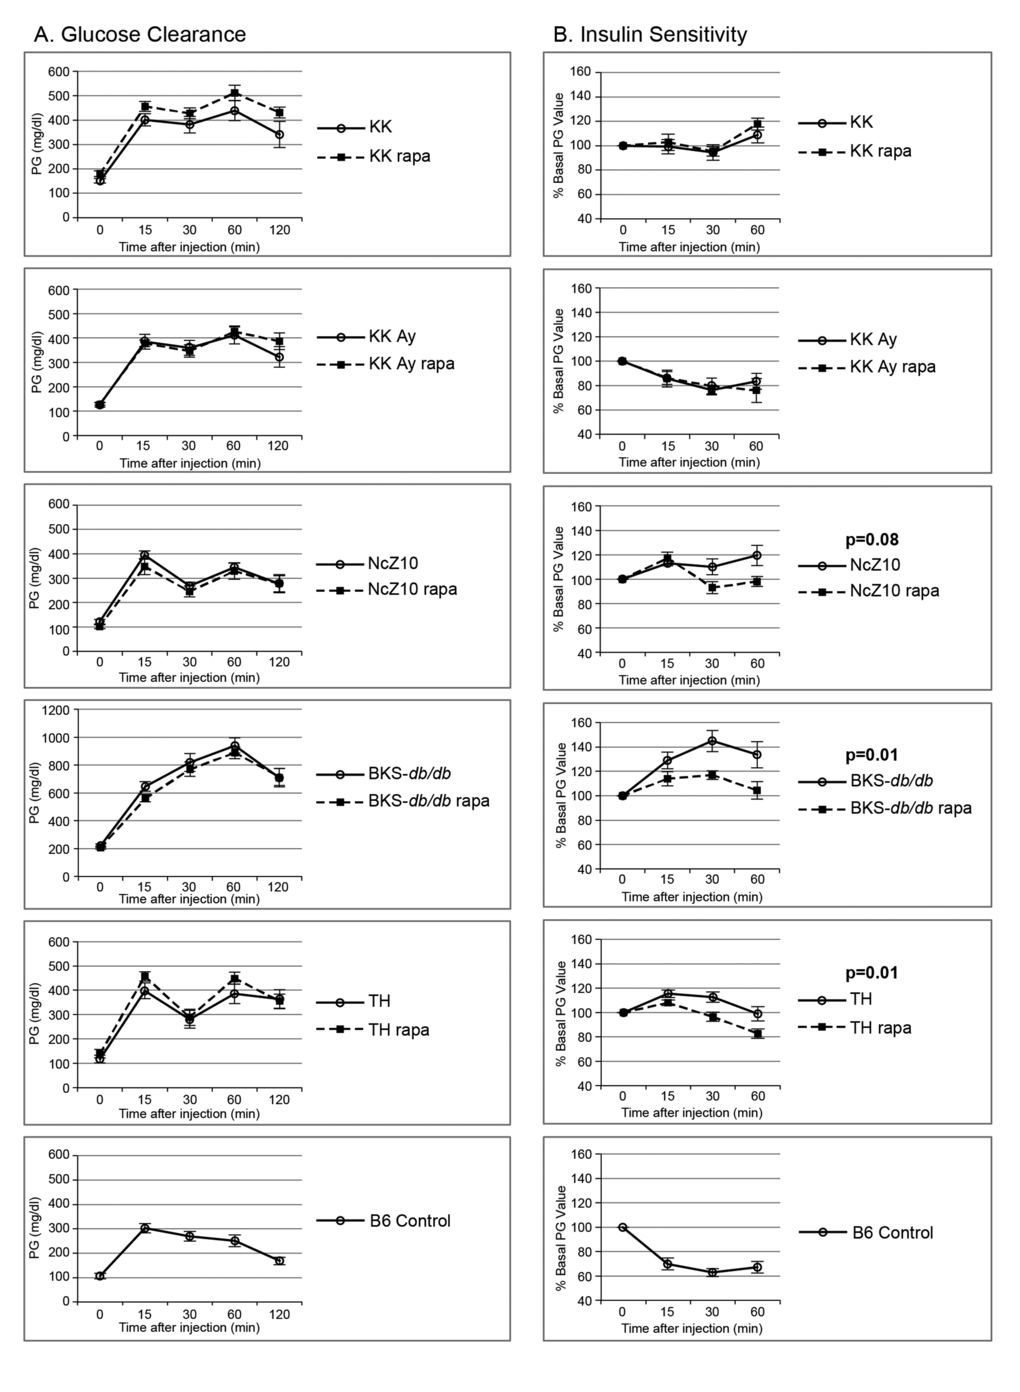 Effect of rapamycin on glucose clearance and insulin sensitivity in 5 diabesity models. (A) Rapamycin does not exacerbate glucose intolerance in 5 glucose intolerant strains. (B) Rapamycin improves insulin sensitivity in the insulin-resistant NcZ10, BKS-db/db, and TH strains. Two or three B6 controls were tested with each strain (cumulative data shown, n = 13–16) to serve as positive controls for the glucose and insulin injections, as quality controls, and for reference values. P values are given for repeated measures MANOVA (n = 5–6 per strain/treatment group except for NcZ10, n = 11).